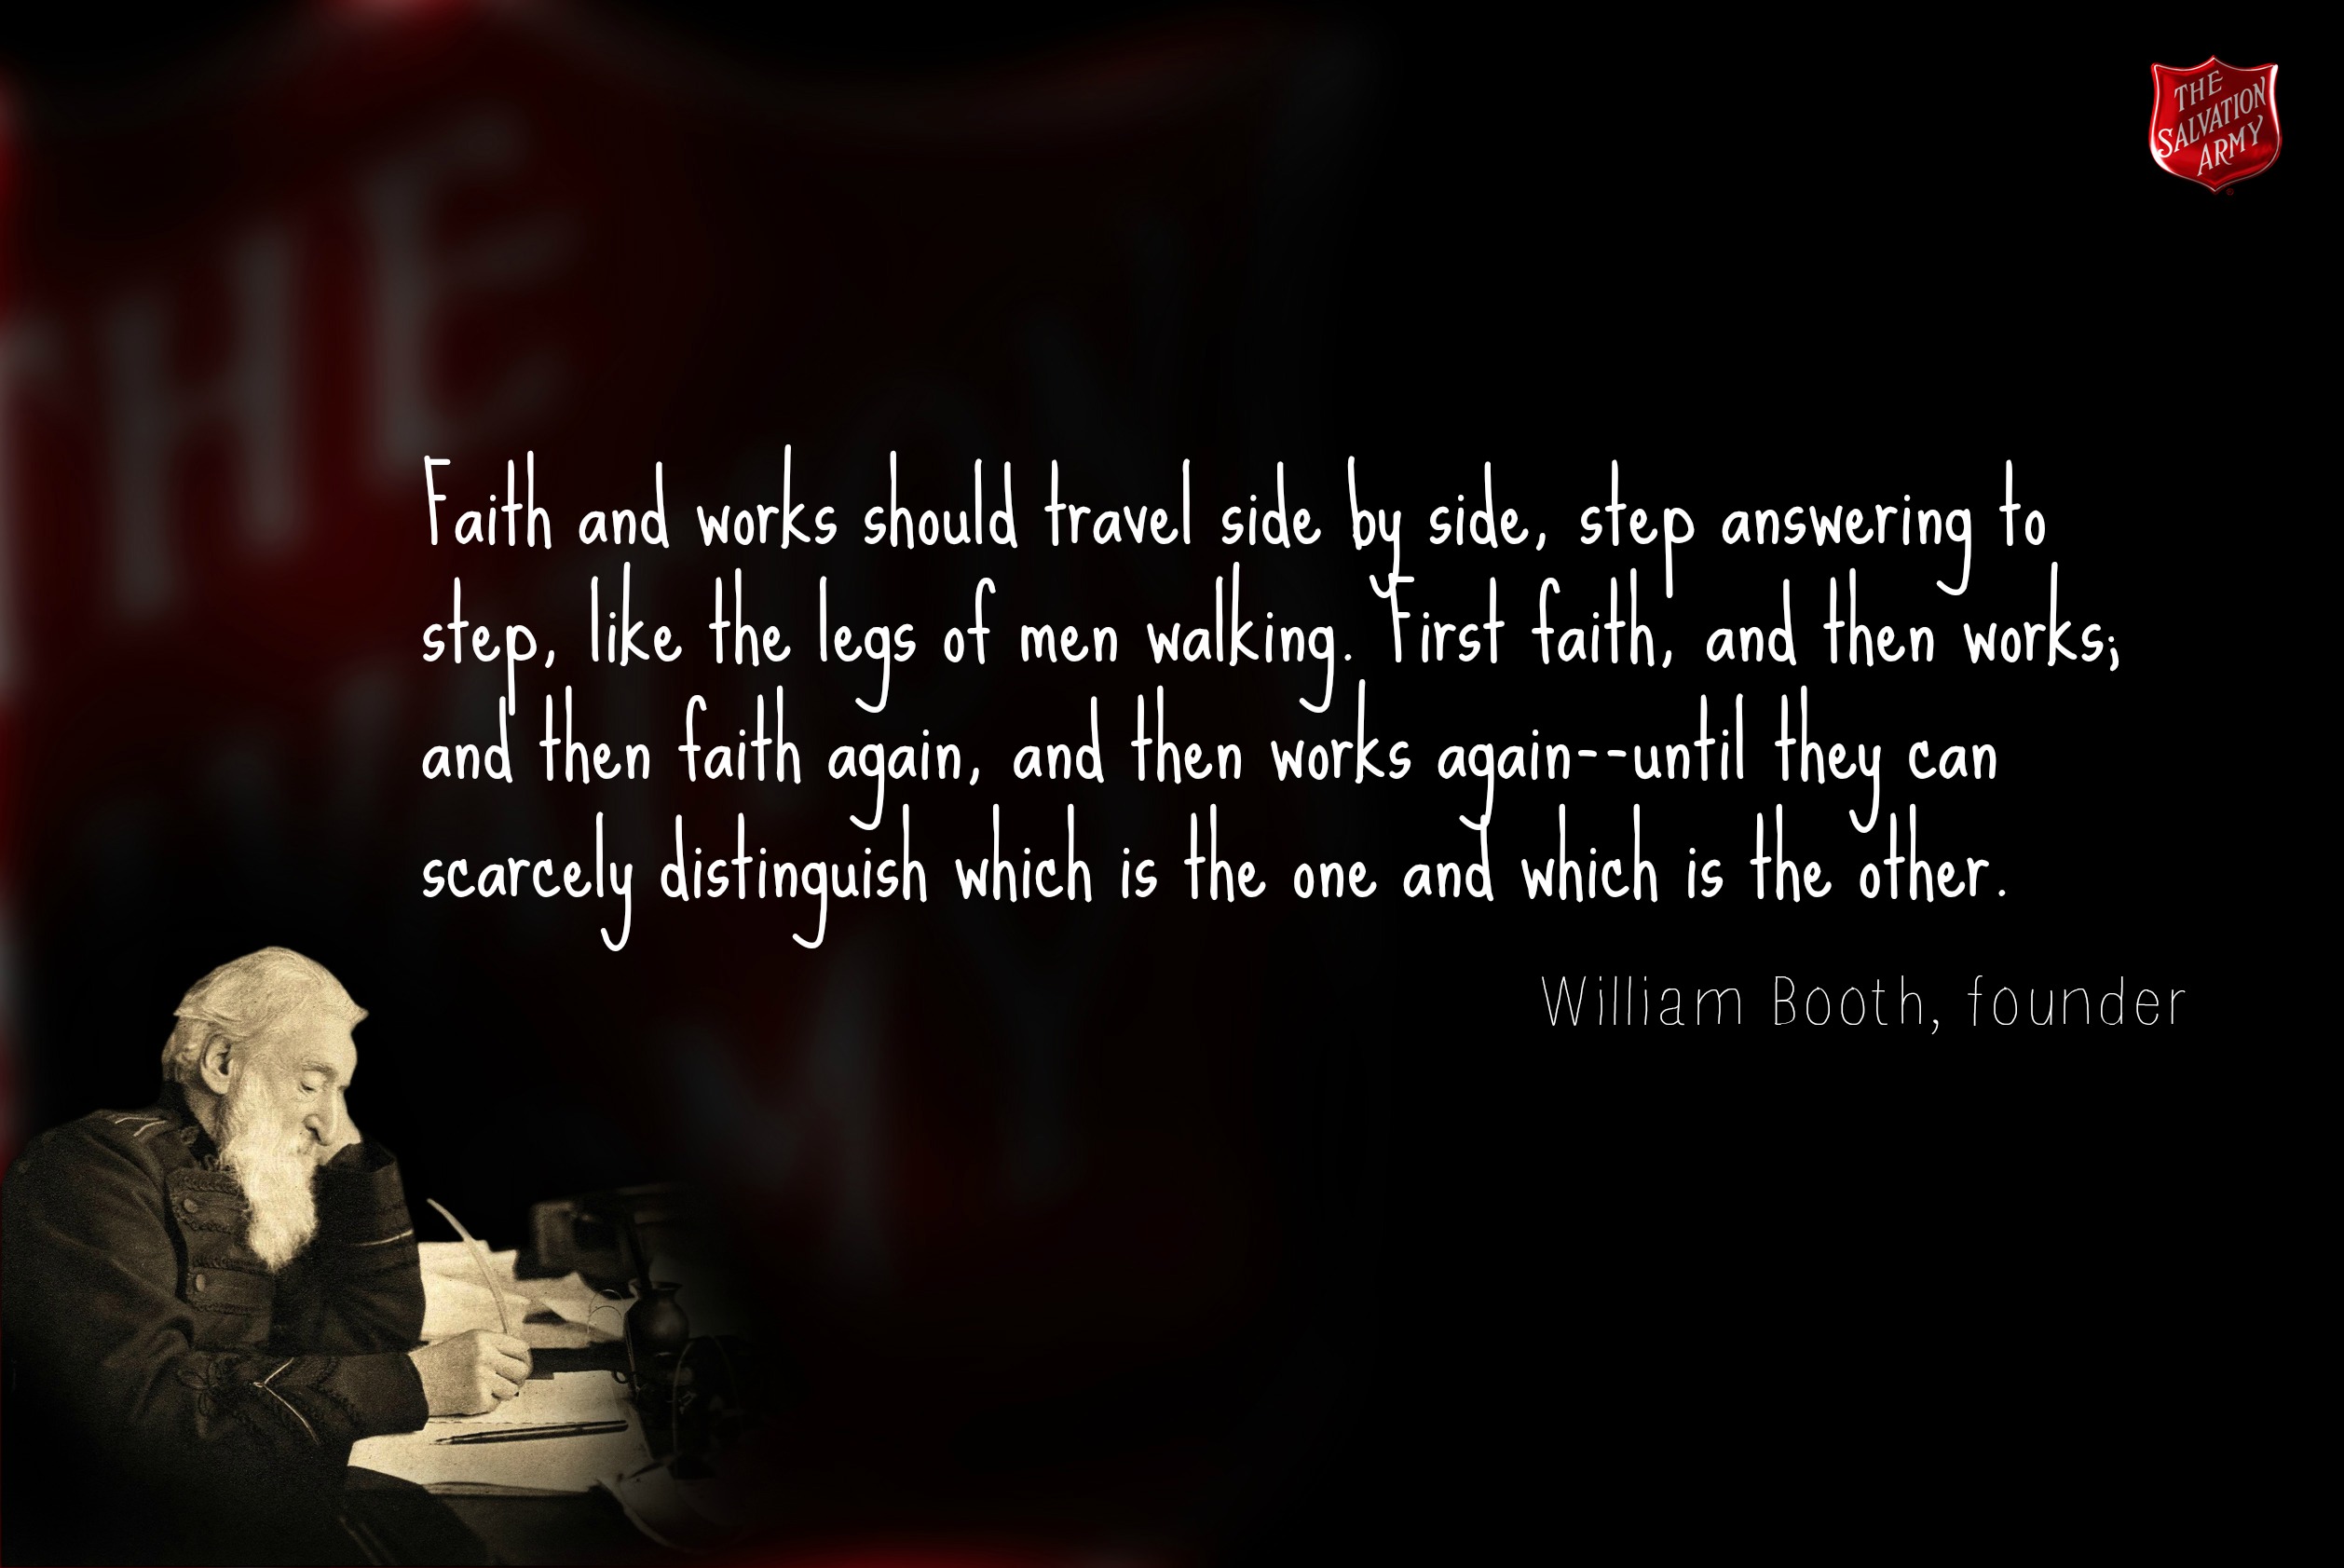 faith-and-works-quote